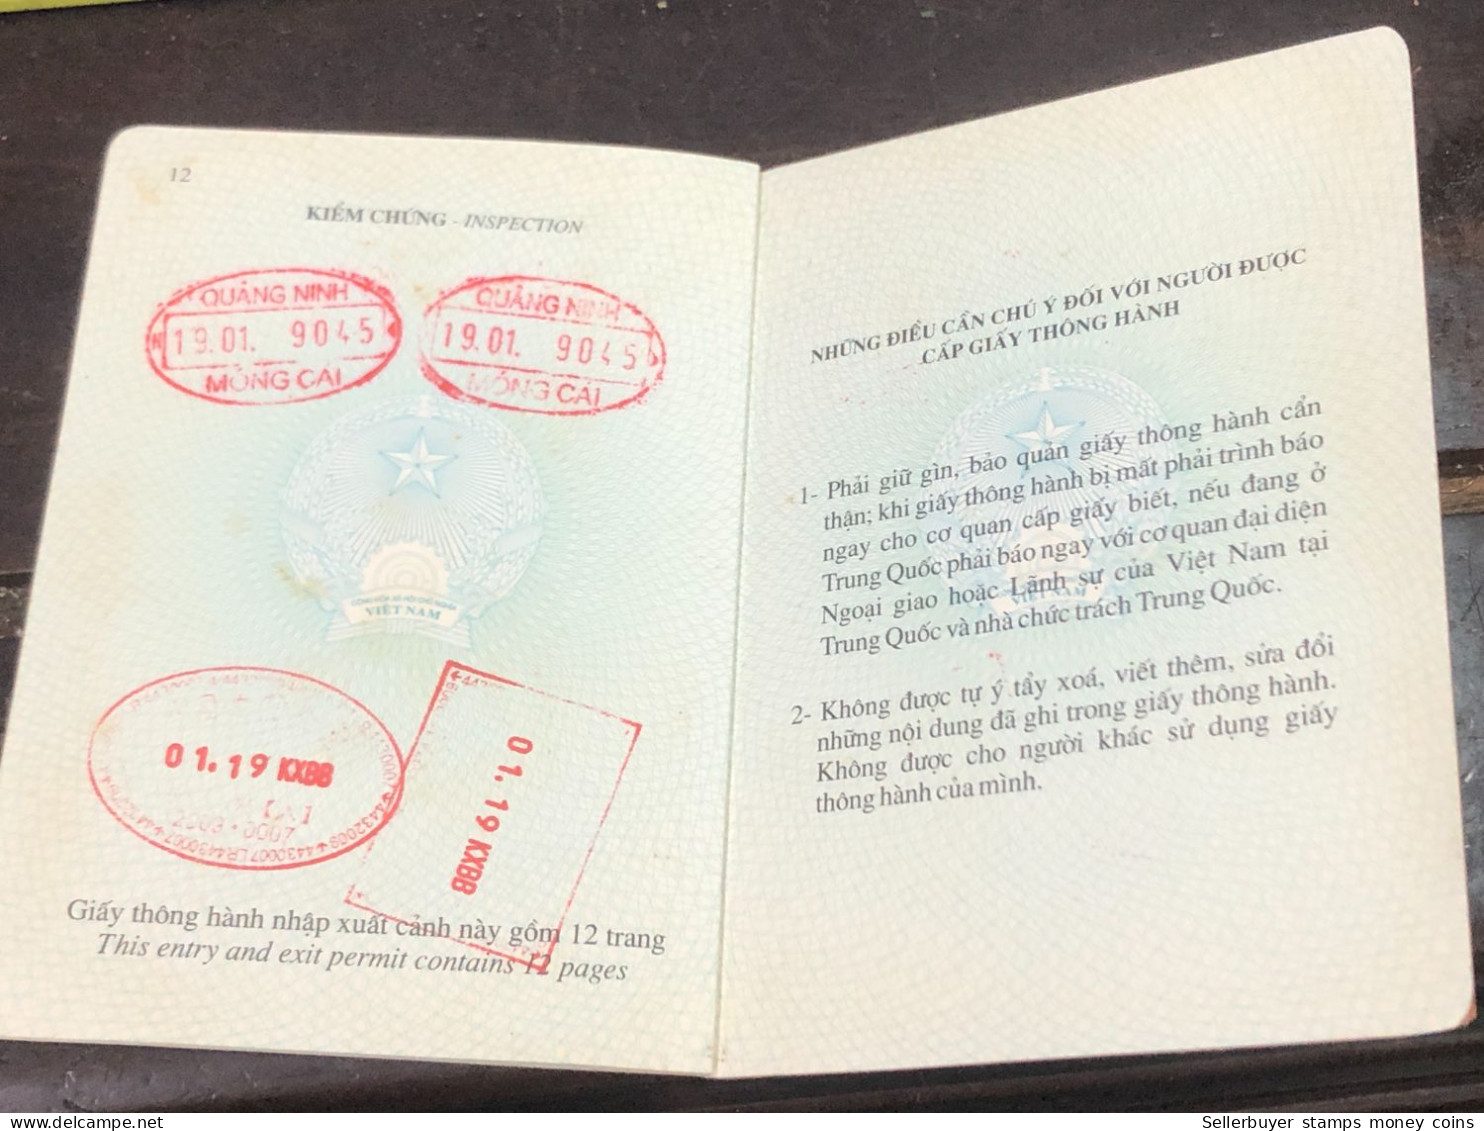 VIET NAM -OLD-GIAY THONG HANH XUAT CANH-ID PASSPORT-name-NGUYEN QUOC TE-2009-1pcs Book - Collections